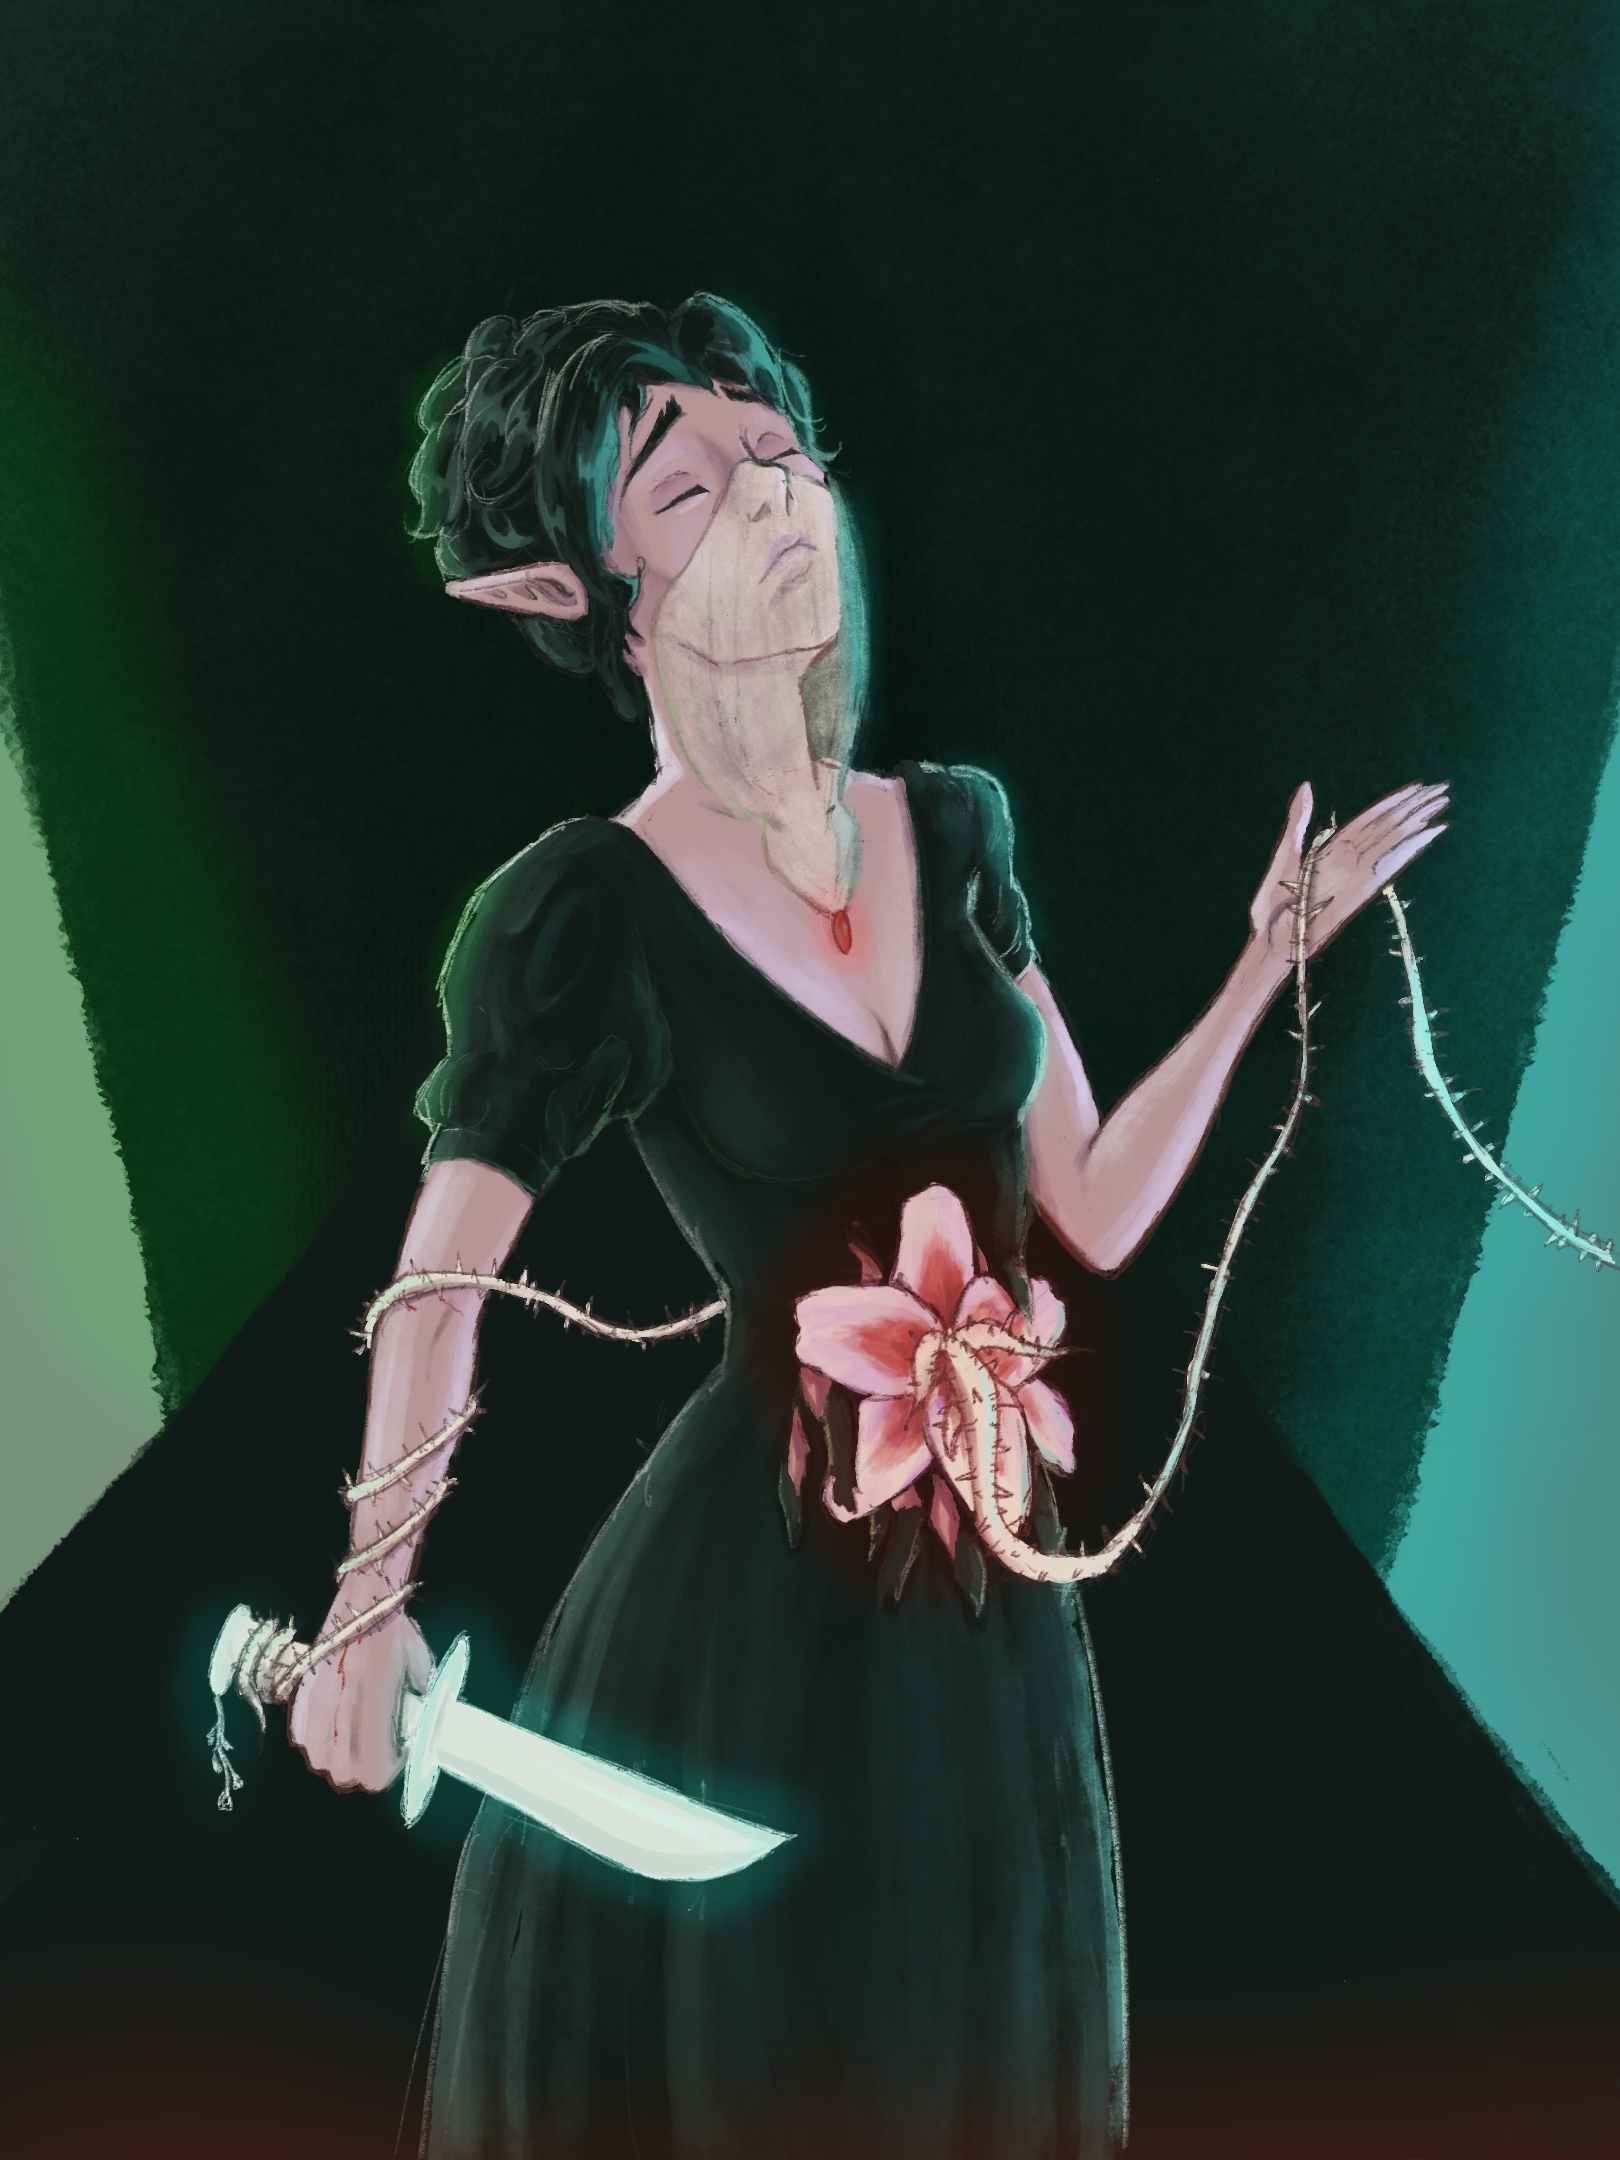 A digital painting of an elven woman with a large flower
and thorny vines growing out of her stomach. She wears a ceremonial dress and
hold s a glowing knife, preparing to cut the thorny vine.